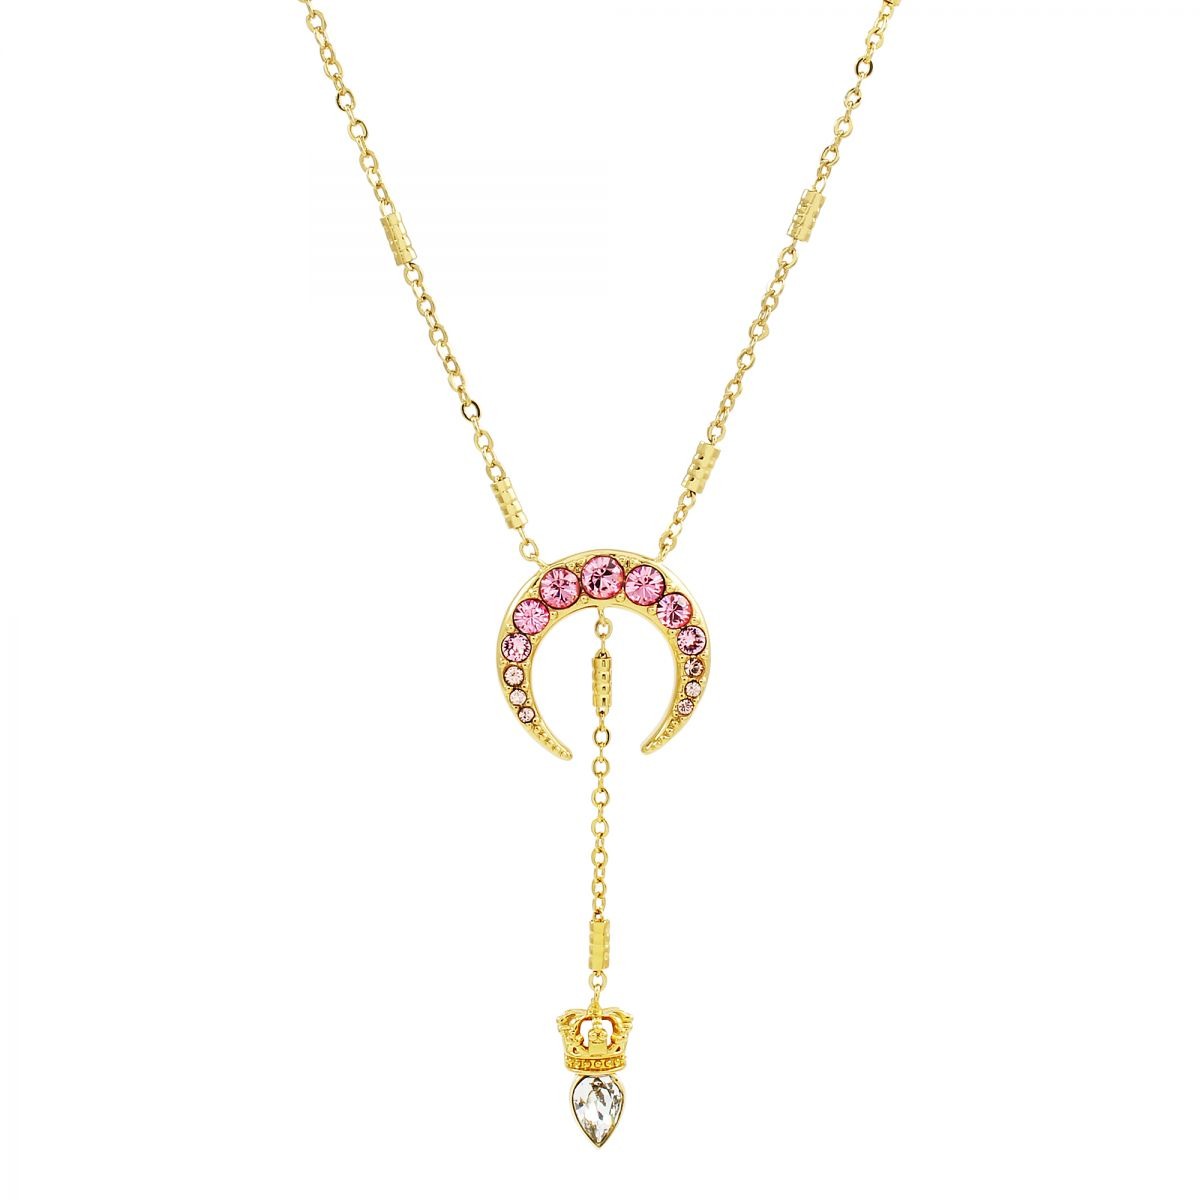 Juicy Couture Gold Necklace Watch Shop GOOFASH